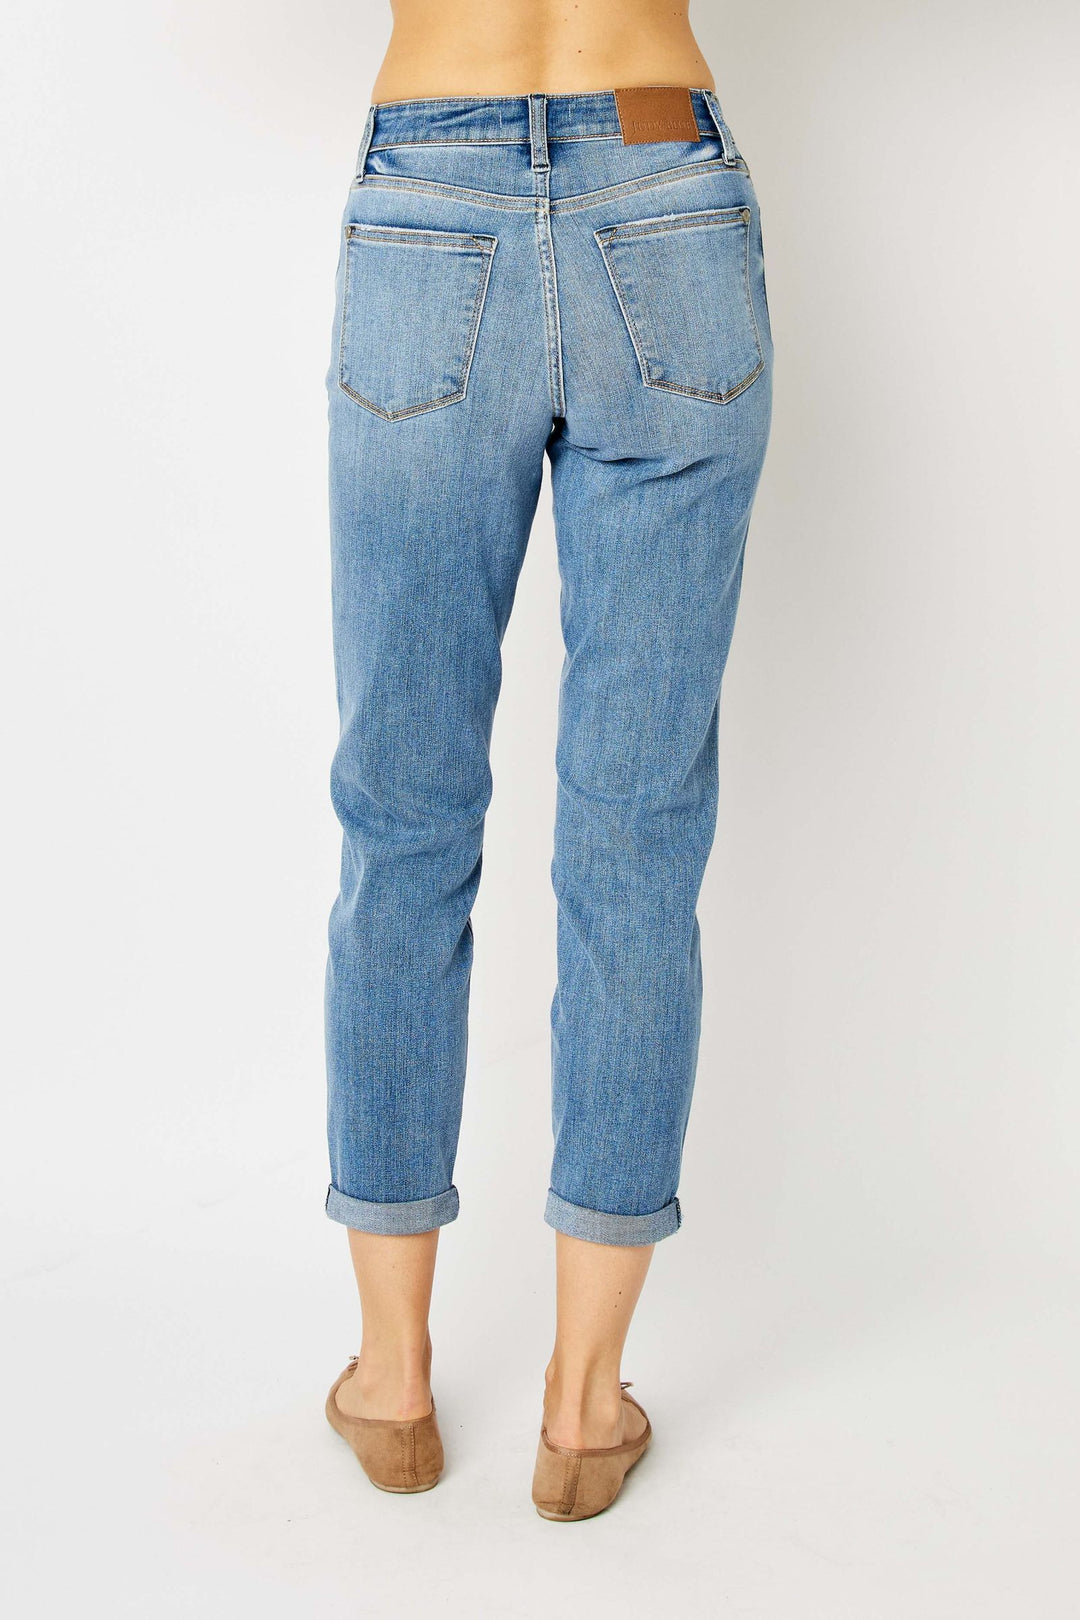 Millie Mid Rise Slim Fit Denim, Judy Blue-Denim-Inspired by Justeen-Women's Clothing Boutique in Chicago, Illinois